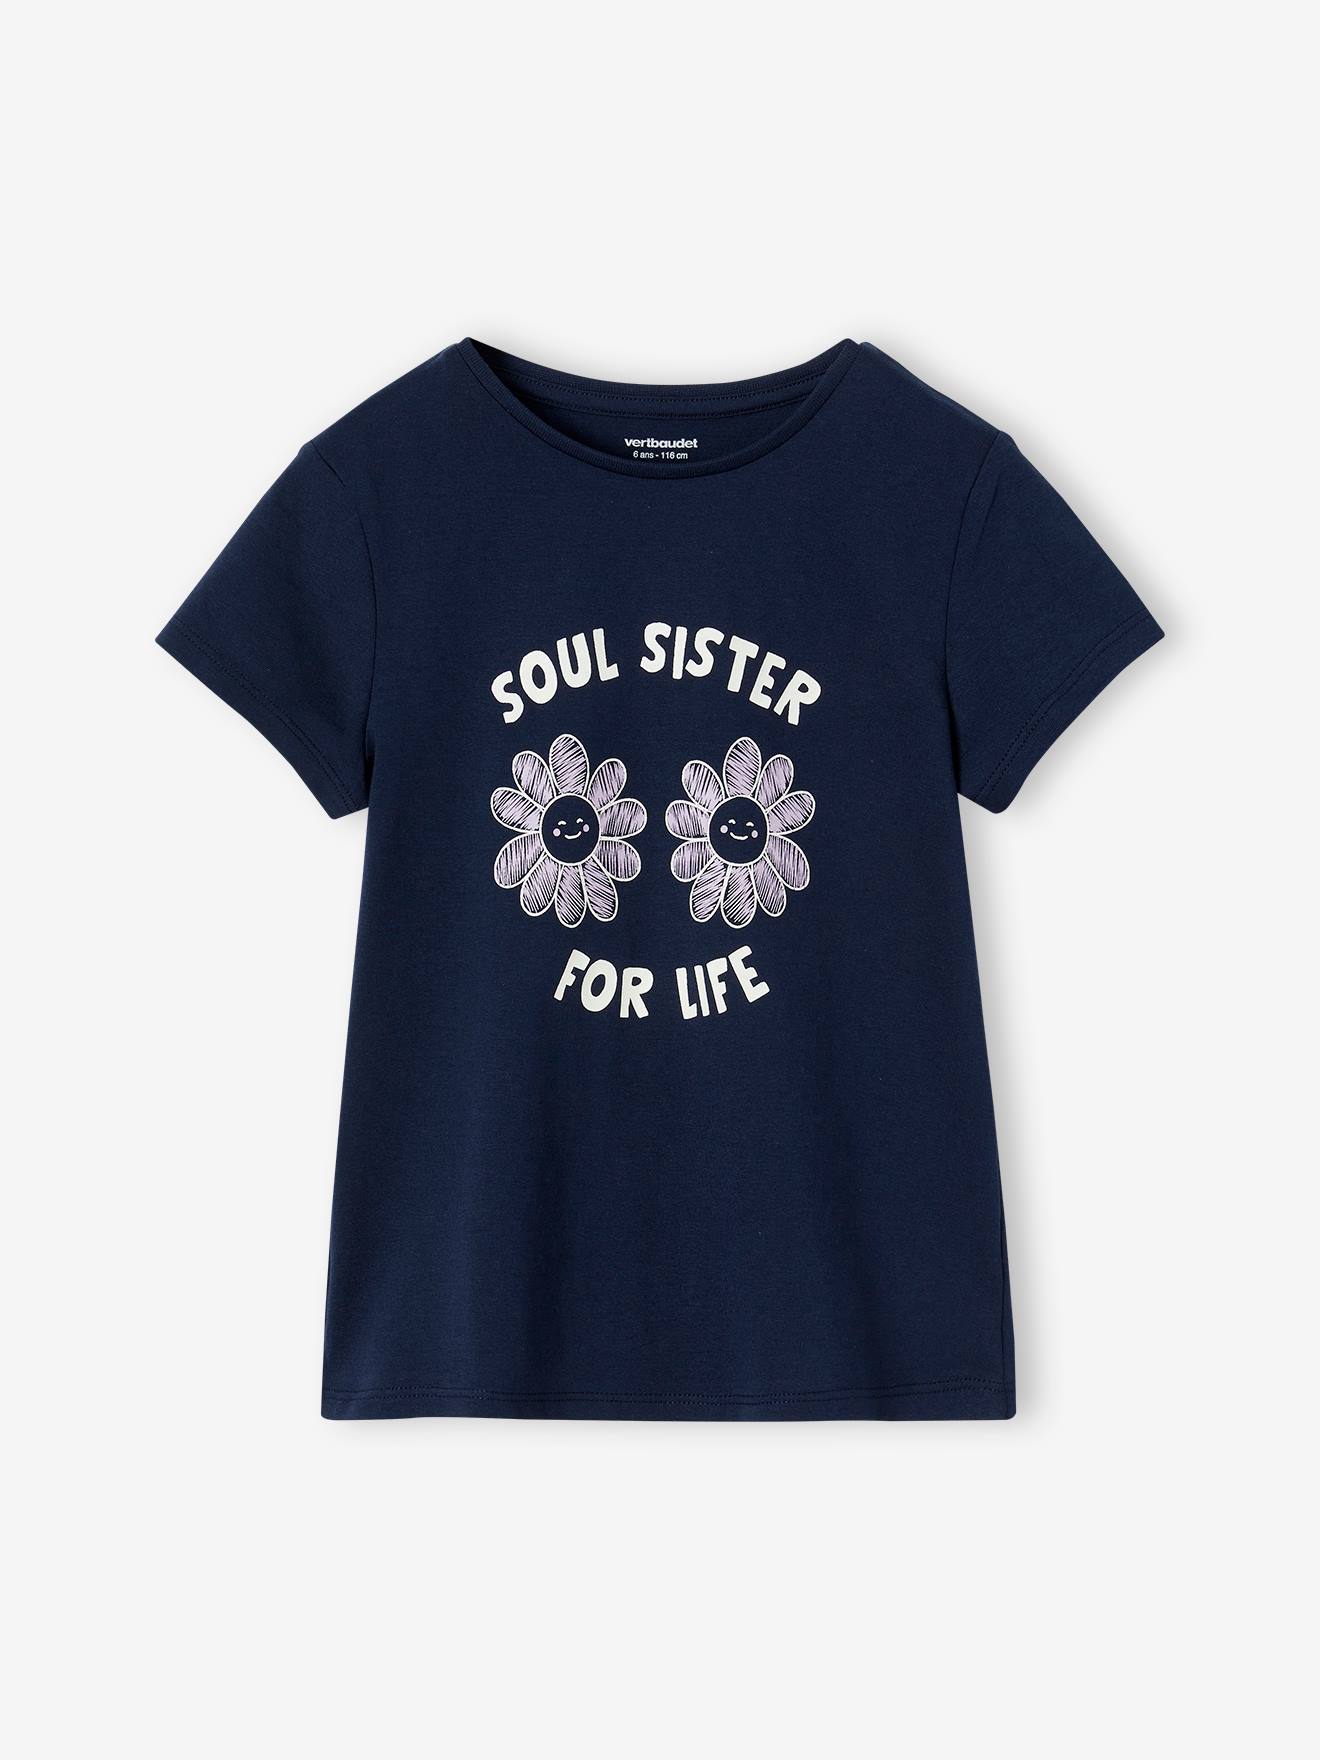 T-Shirt with Message, for Girls navy blue